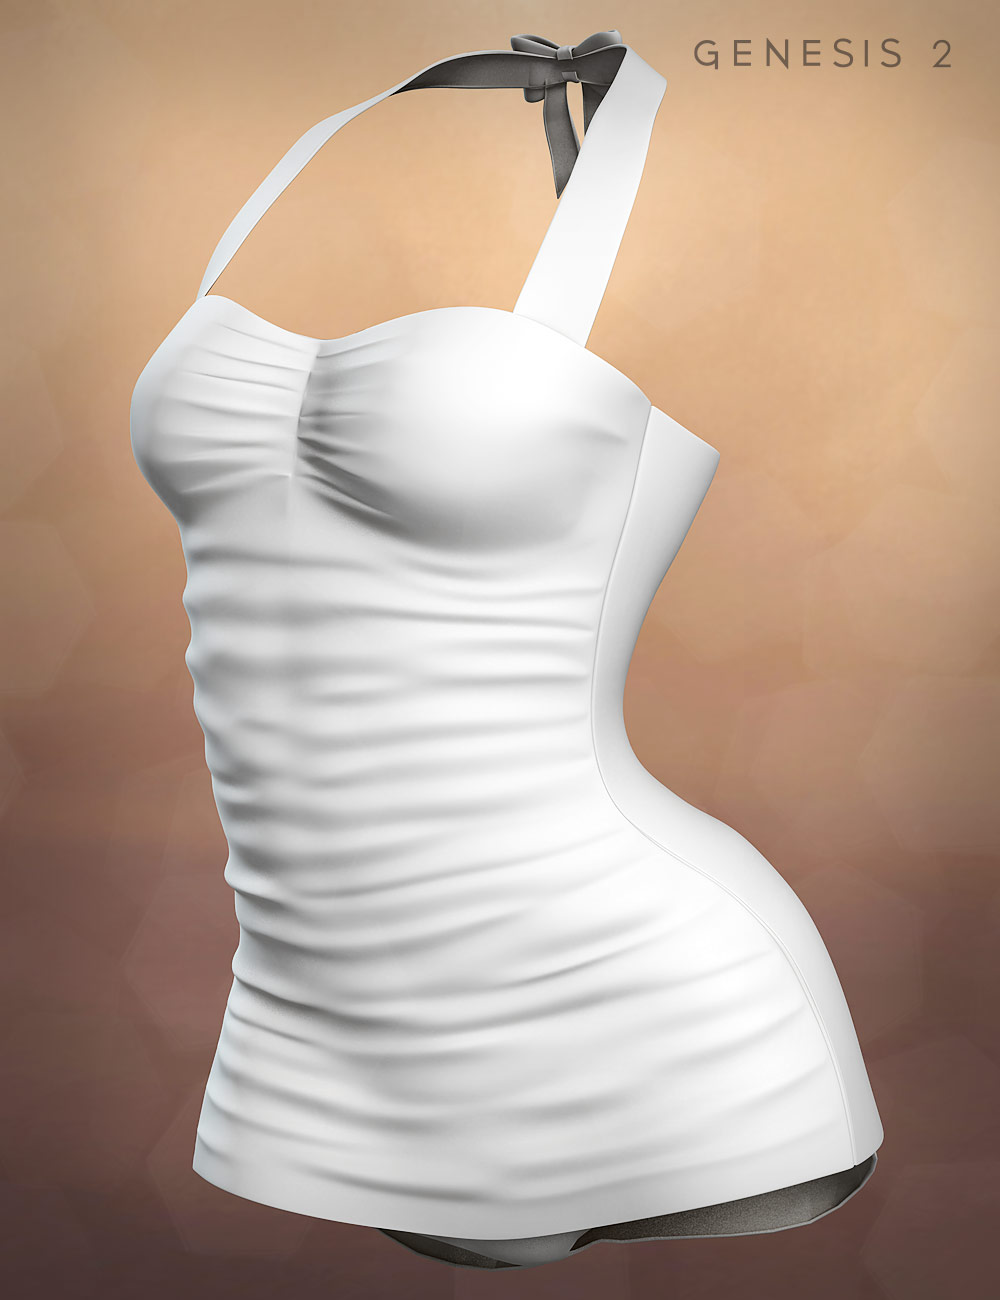 Retro Swimsuit for Genesis 2 Female(s) by: SarsaXena, 3D Models by Daz 3D